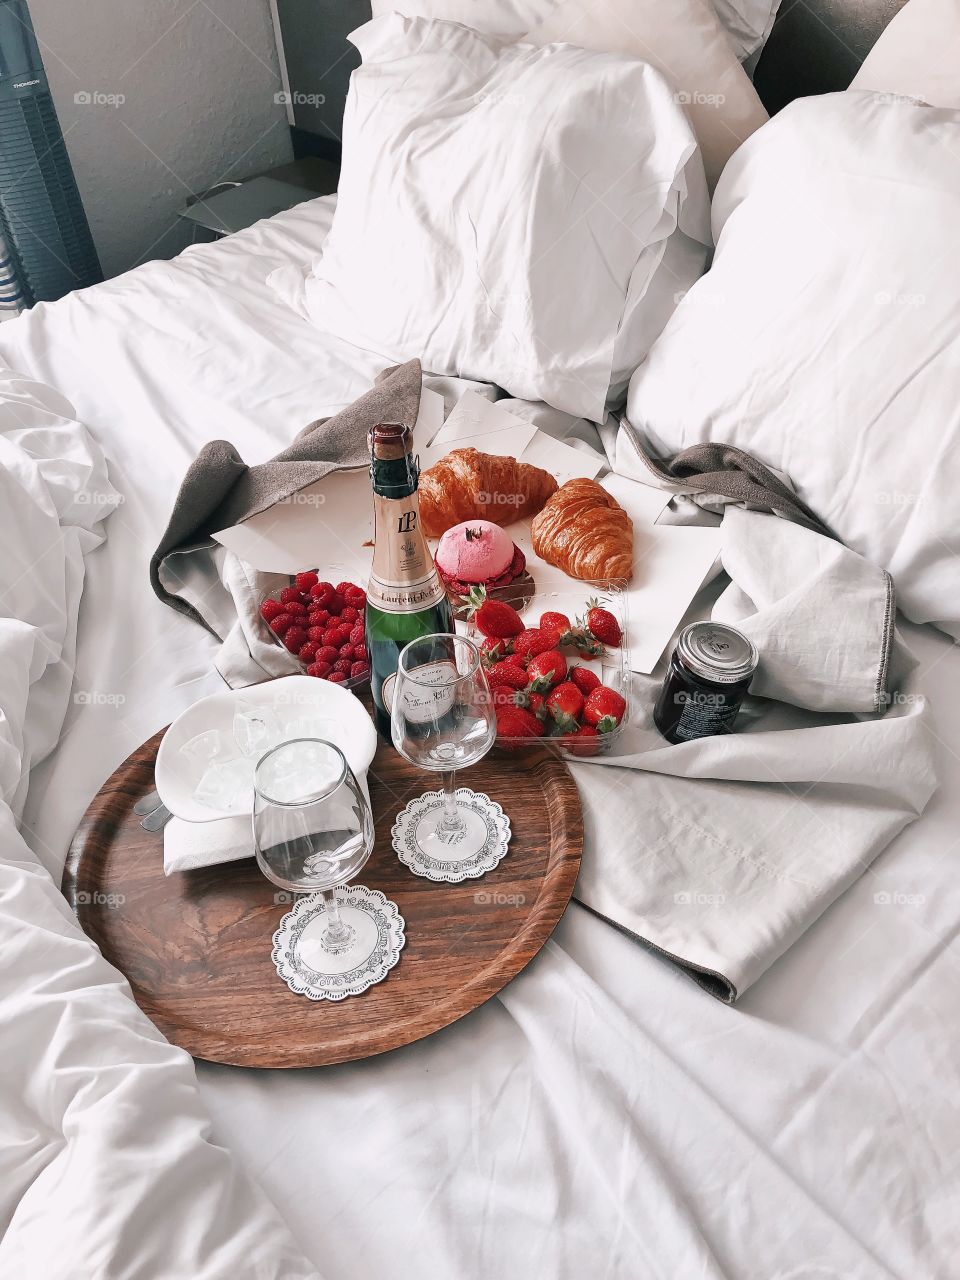 Romantic picnic in bed. Champagne, croissants and strawberry. French style. Eating and bed. Romantic morning. 